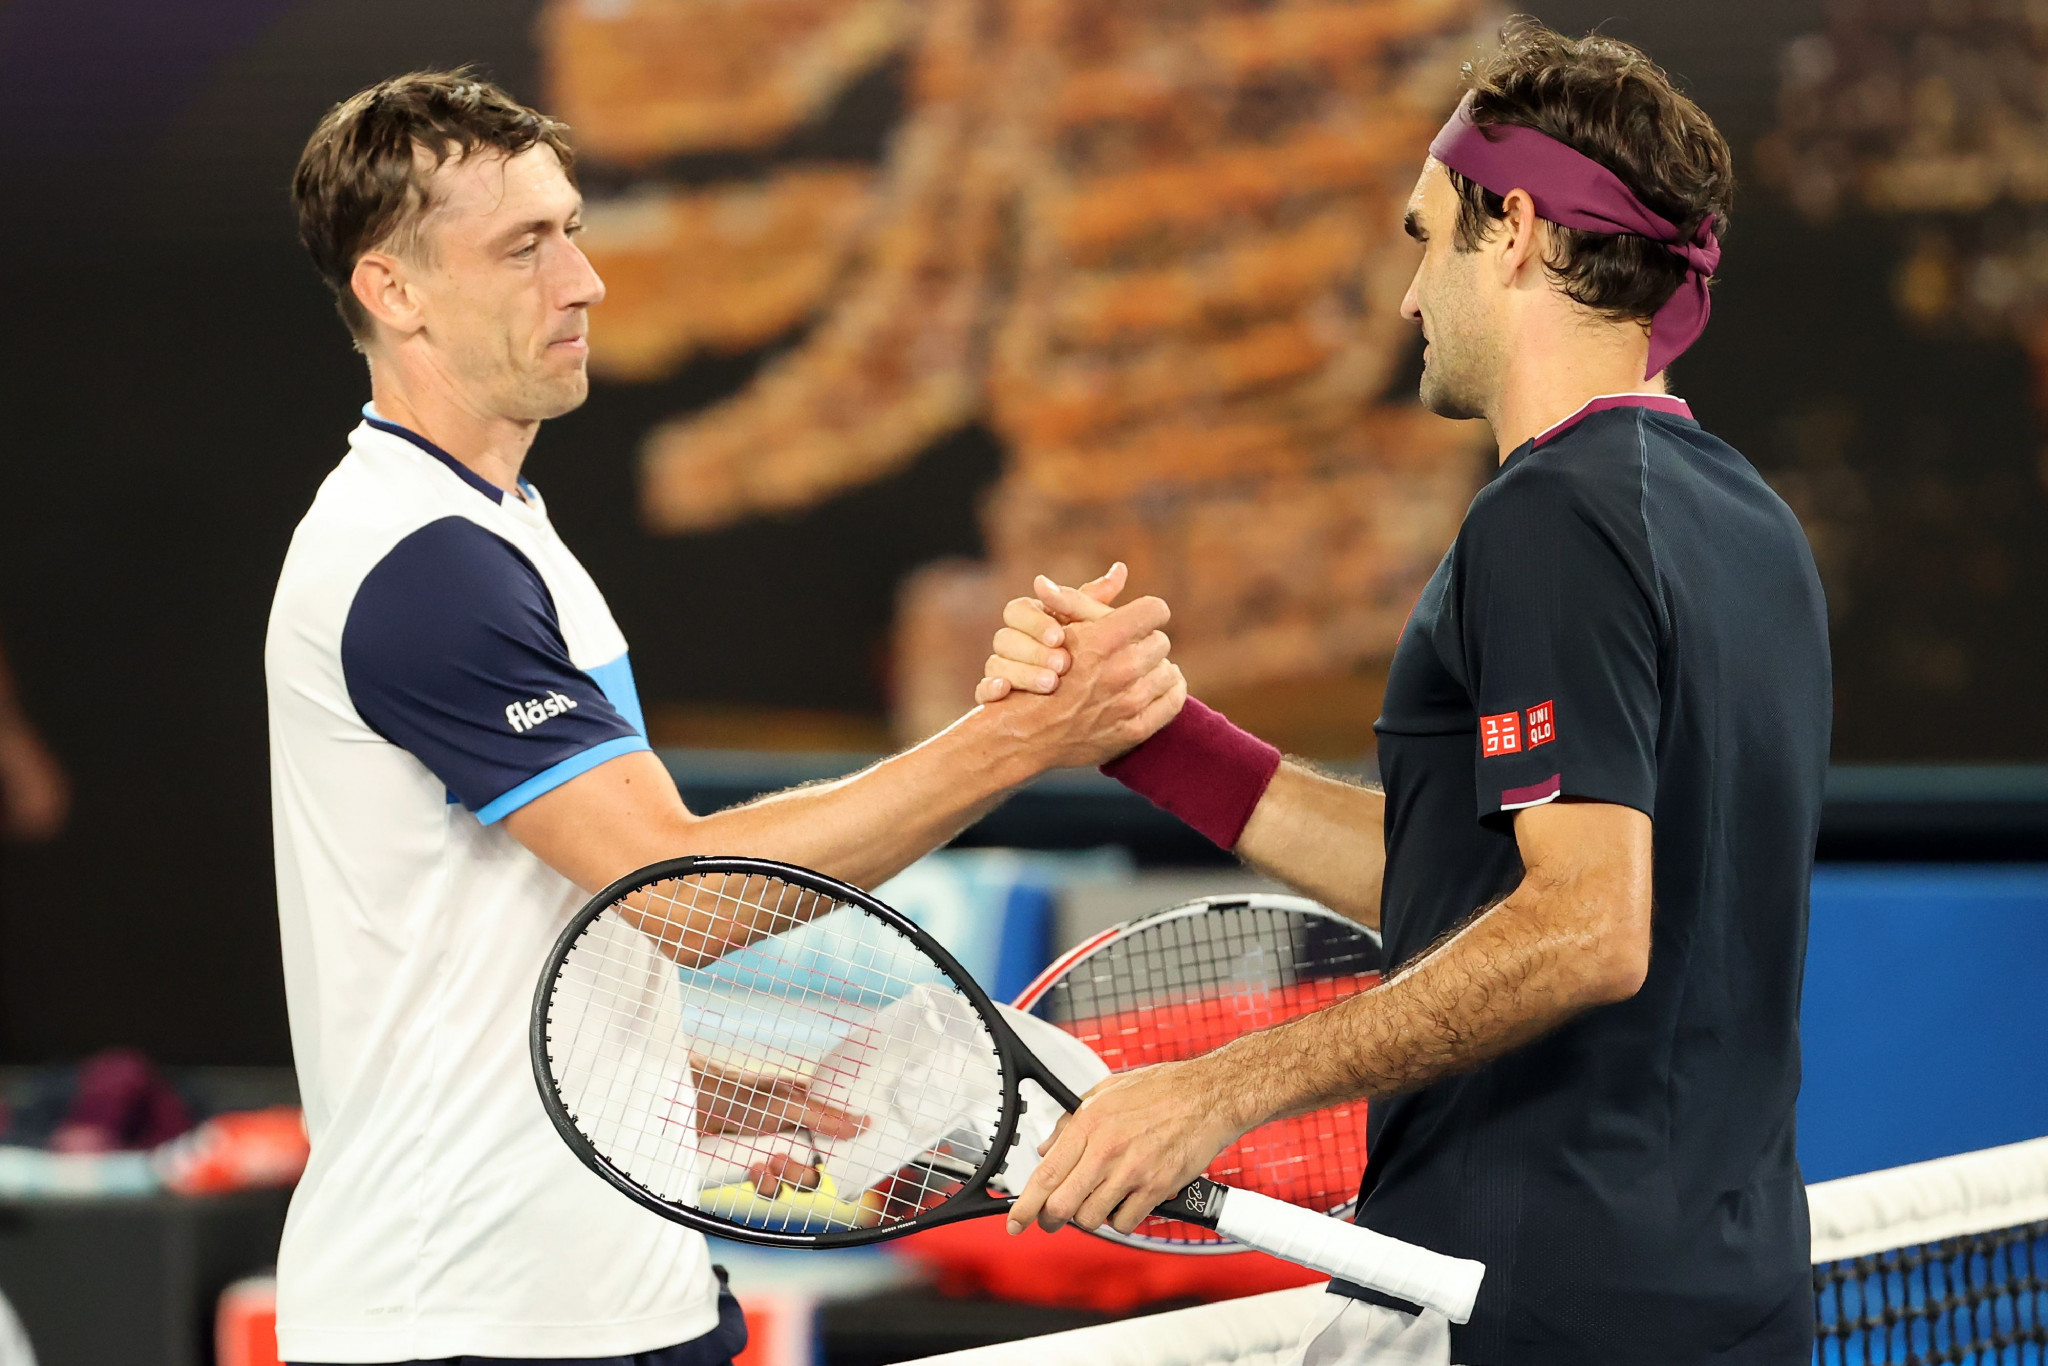 Australia's John Millman, left, shakes hands with Roger Federer after losing his Australian Open third round match on a tie-breaker in Melbourne - after which allegations were made that he had been attempting to tamper with the balls before he served them ©Getty Images